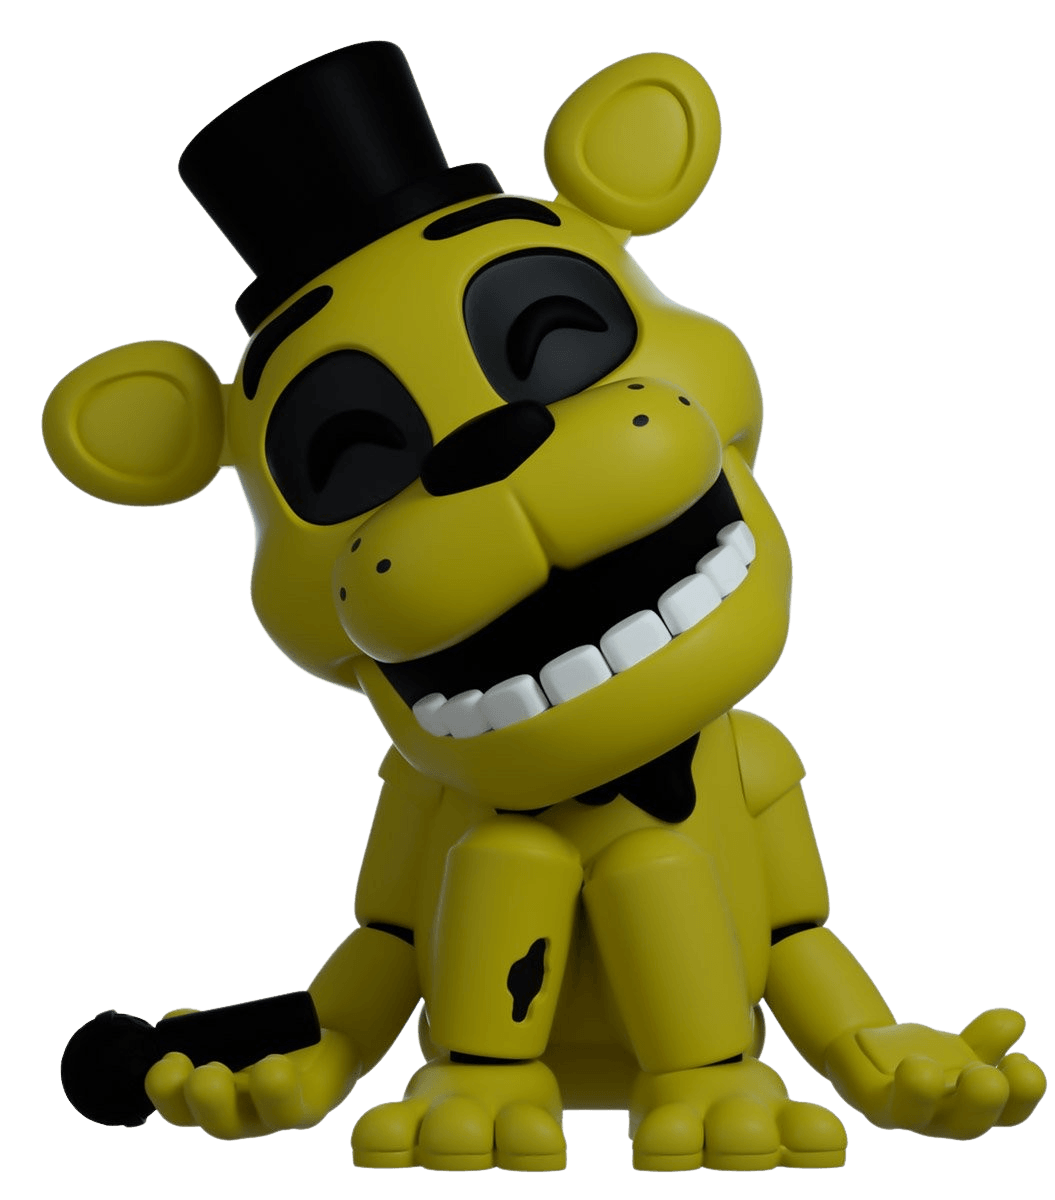 Youtooz - Five Nights at Freddy’s - Golden Freddy Vinyl Figure #12 - The Card Vault